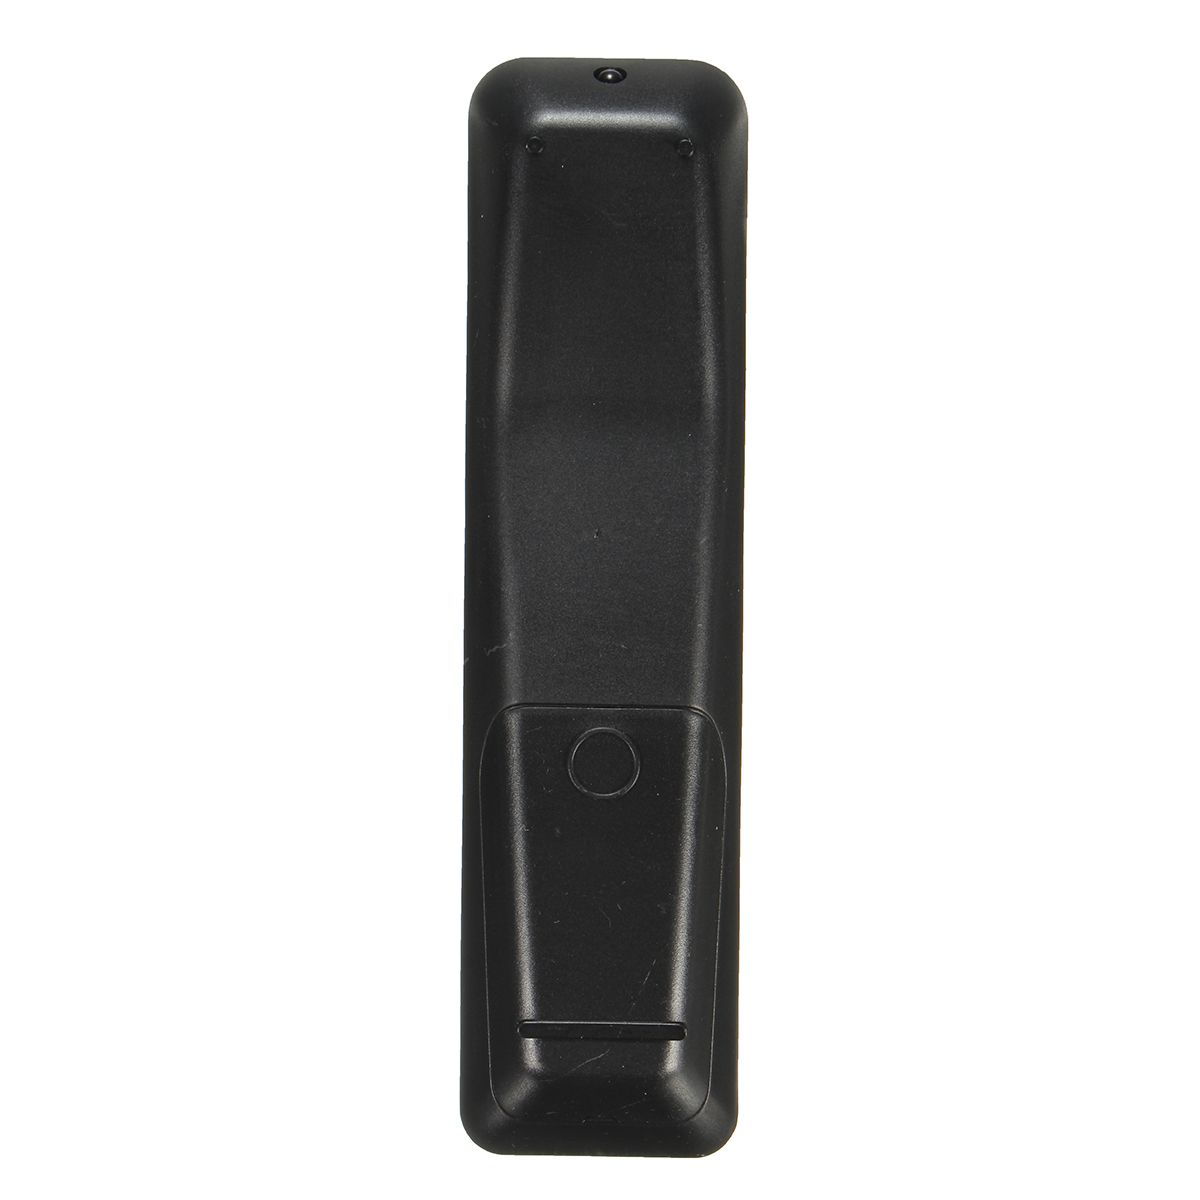 Replacement-TV-Remote-Control-670-for-Philips-TV-670-1284297